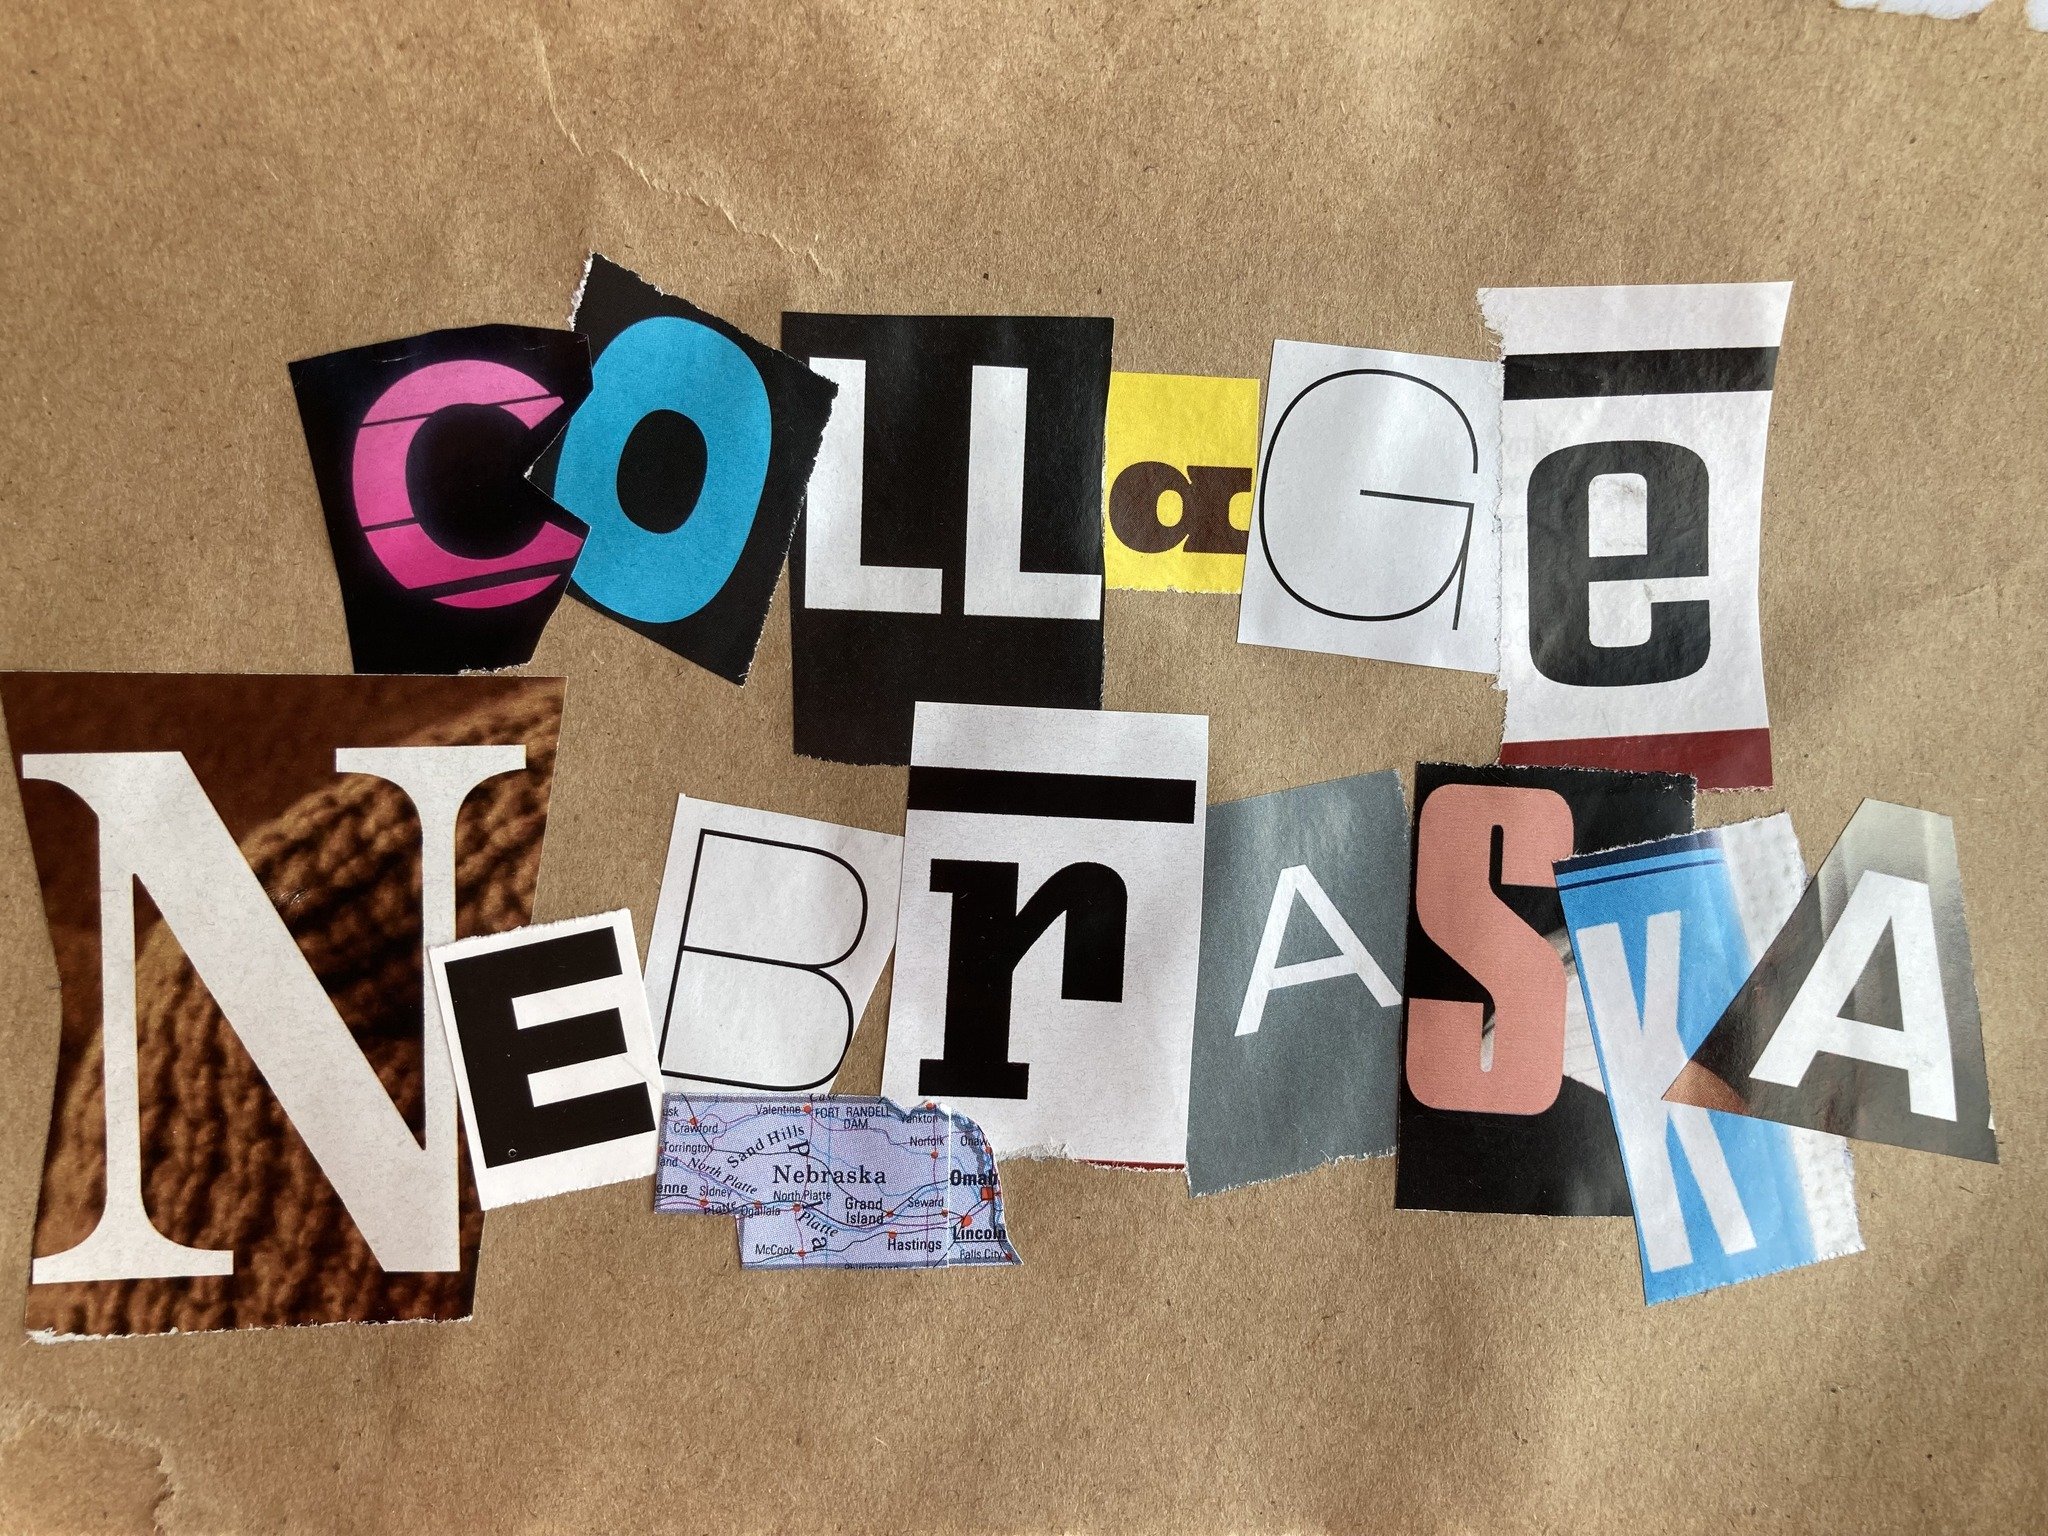 Join us @collage_nebraska to celebrate World Collage Day, May 11
Created in 2018 by the Kolaj Institute and celebrated on the second Saturday of May, World Collage Day unites artists around the world. On May 11, we&rsquo;ll connect beyond political, 